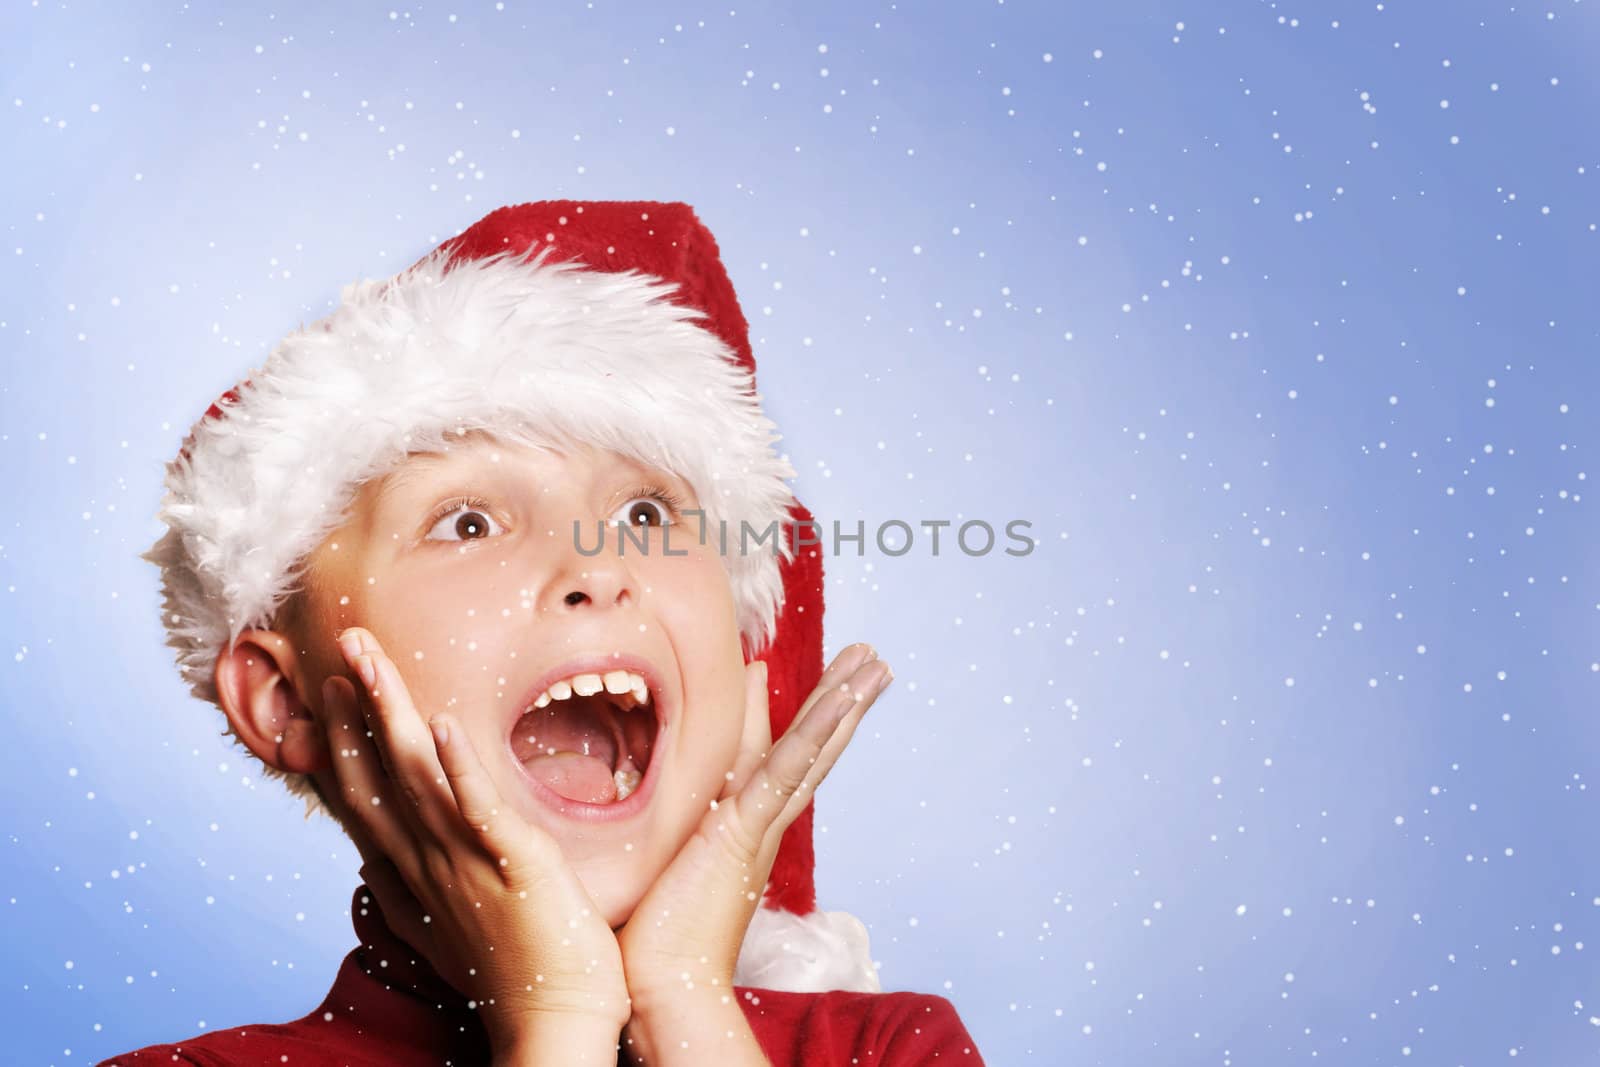 Excited young boy amongst snowflakes.